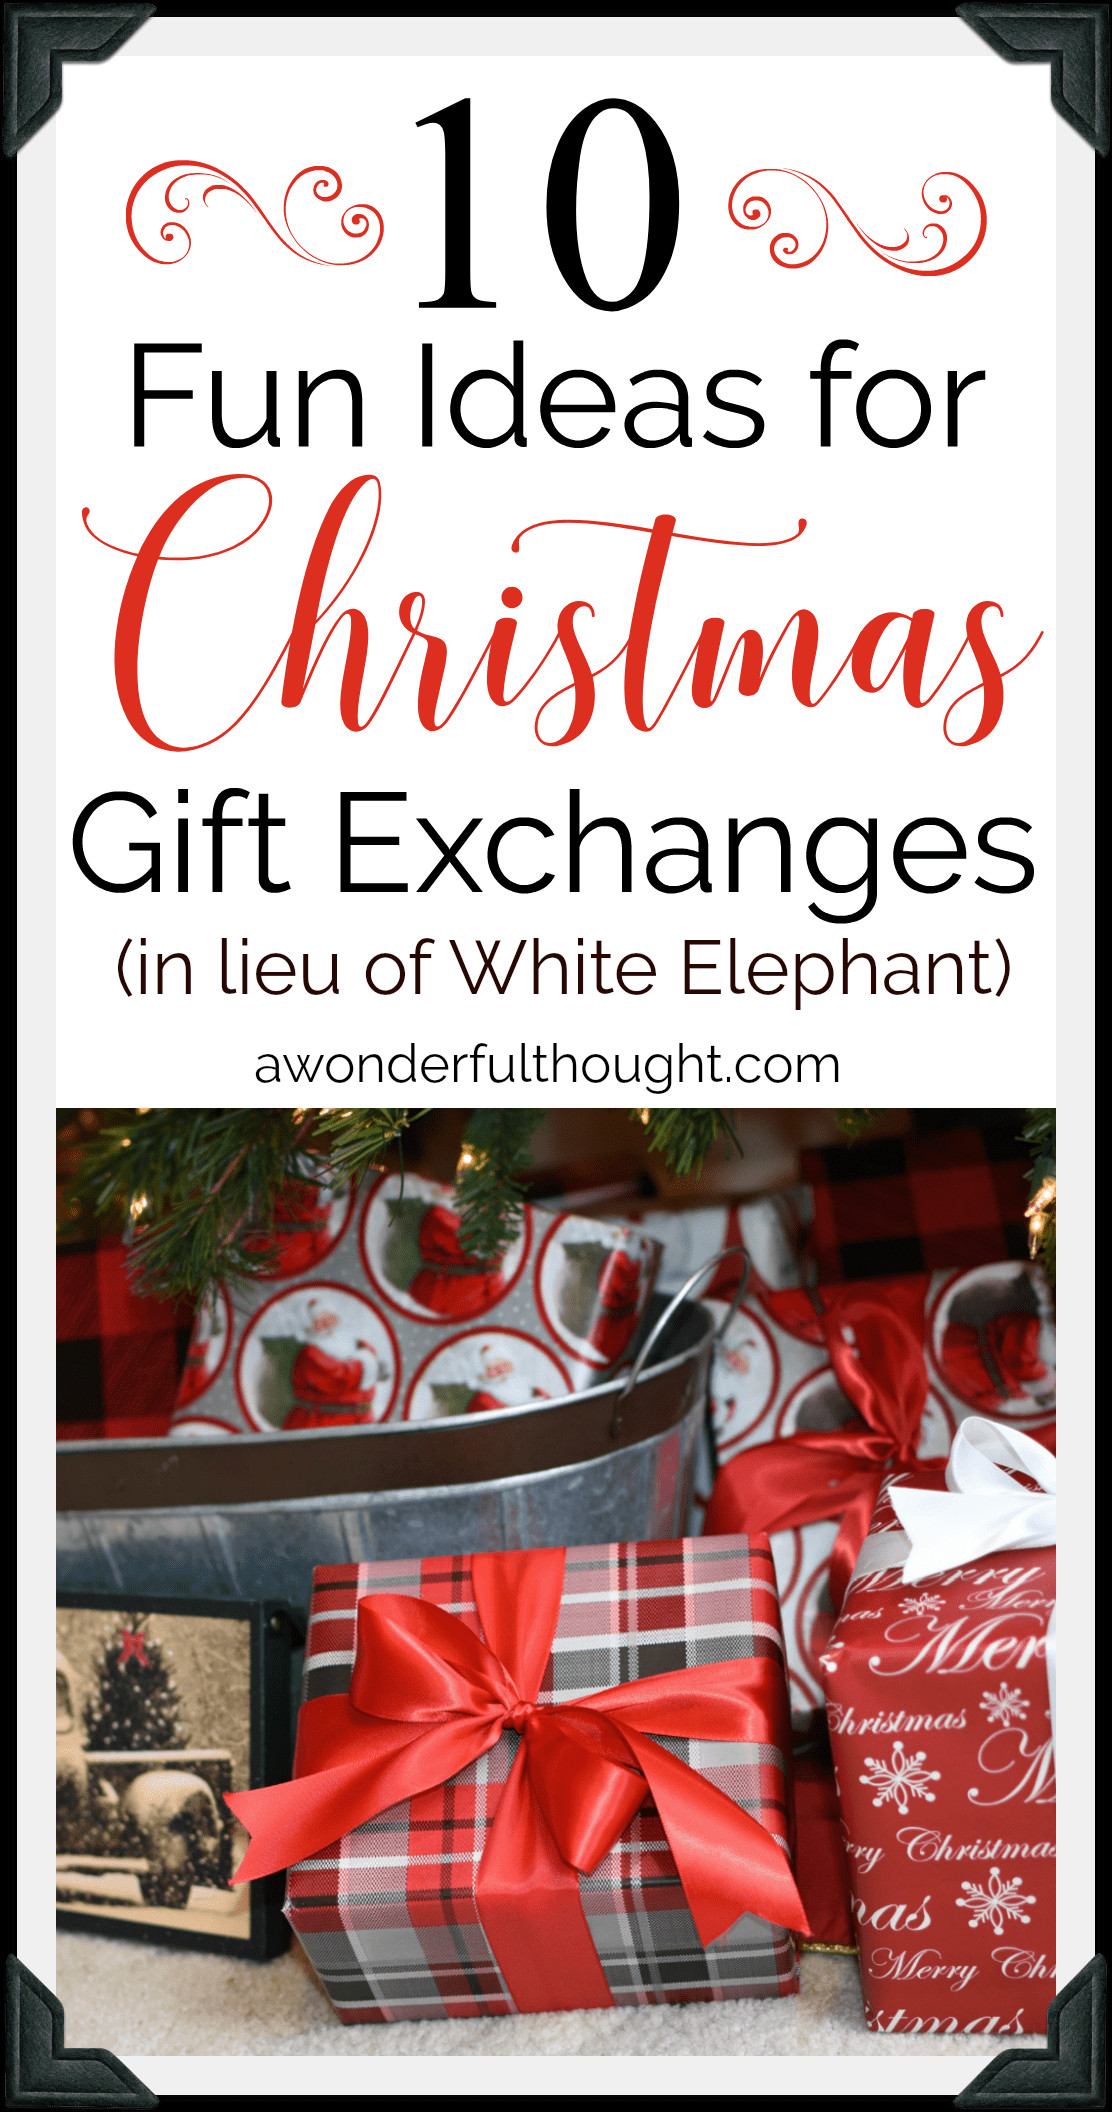 Holiday Gift Exchange Game Ideas
 Christmas Gift Exchange Ideas A Wonderful Thought